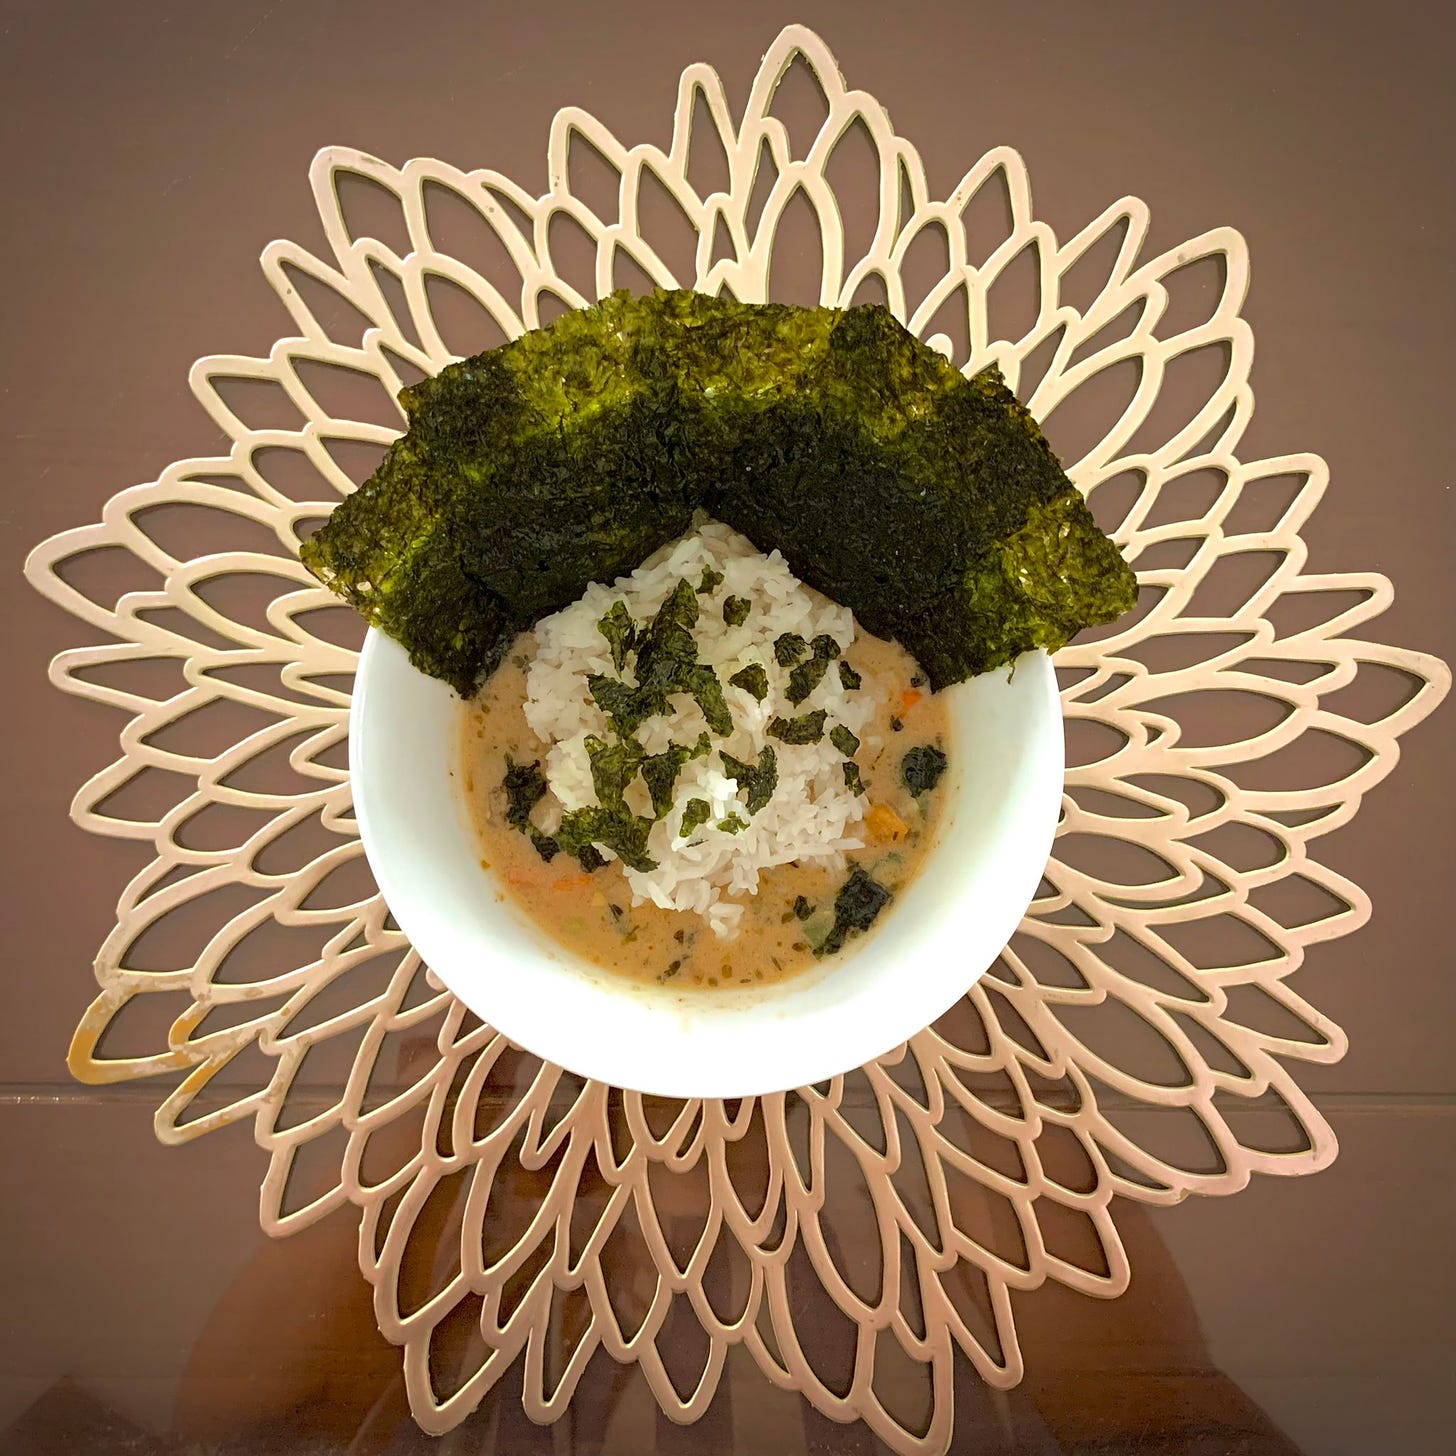 A picture of a bowl rice in soup and a few sheets of nori.